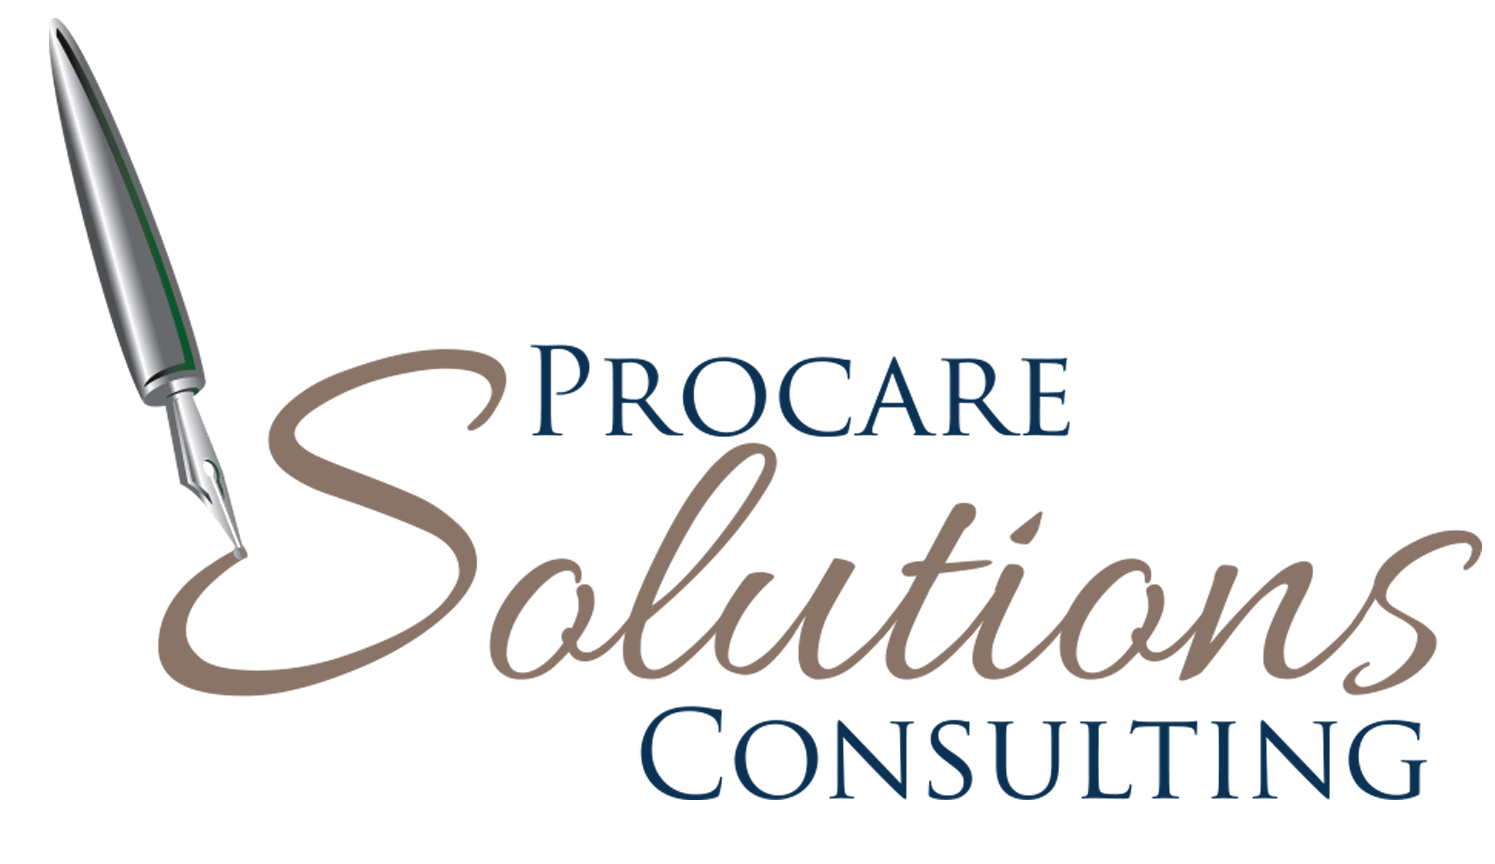 Procare Solutions Consulting